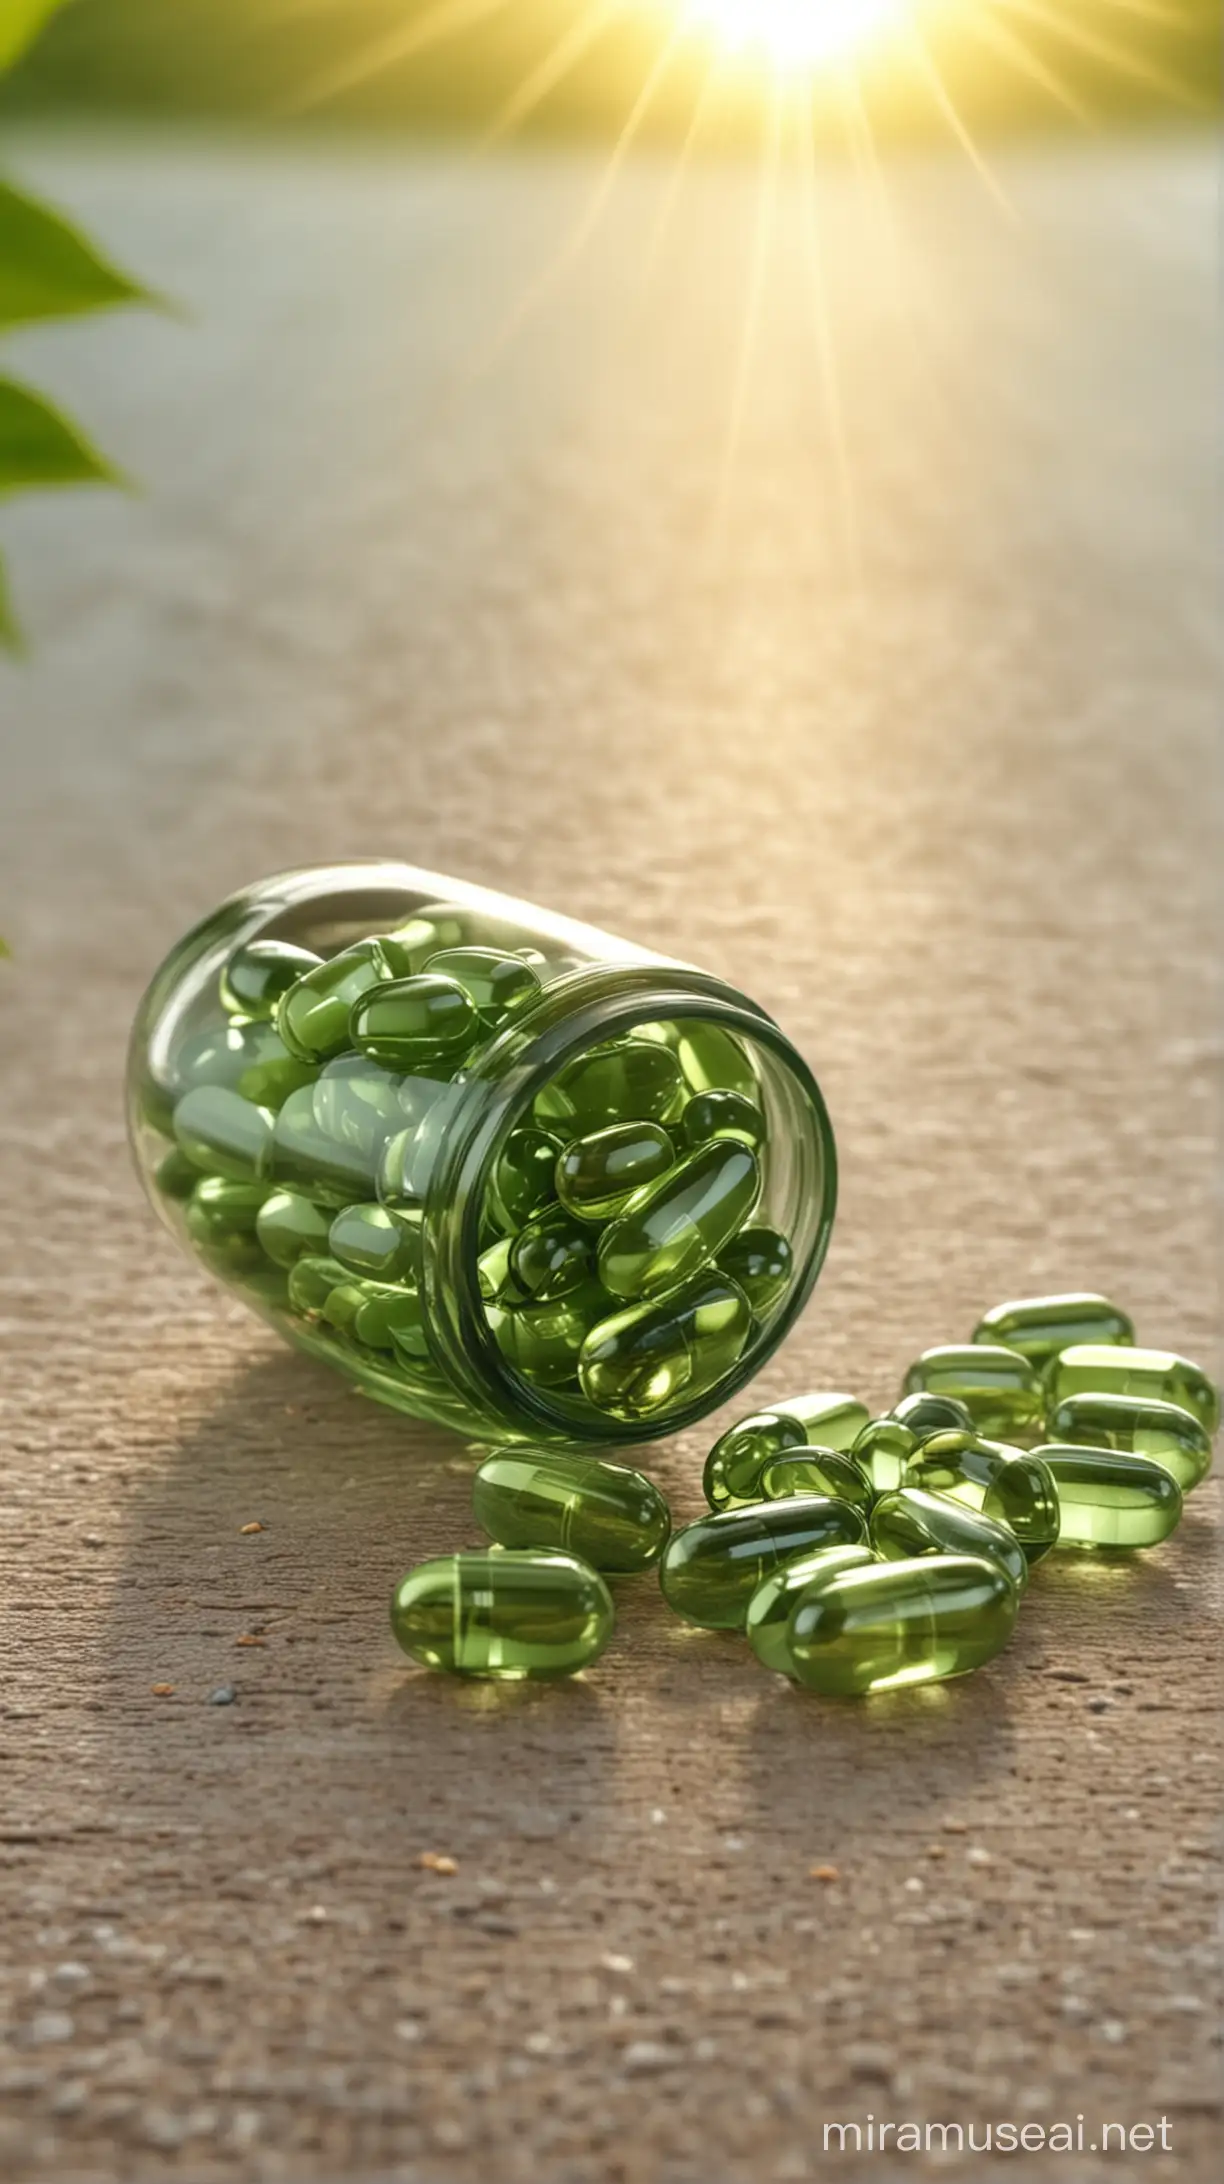 Green Vitamin E Capsule on Table Natural Background with Sunlight Effect in 4K HDR Morning Time Weather